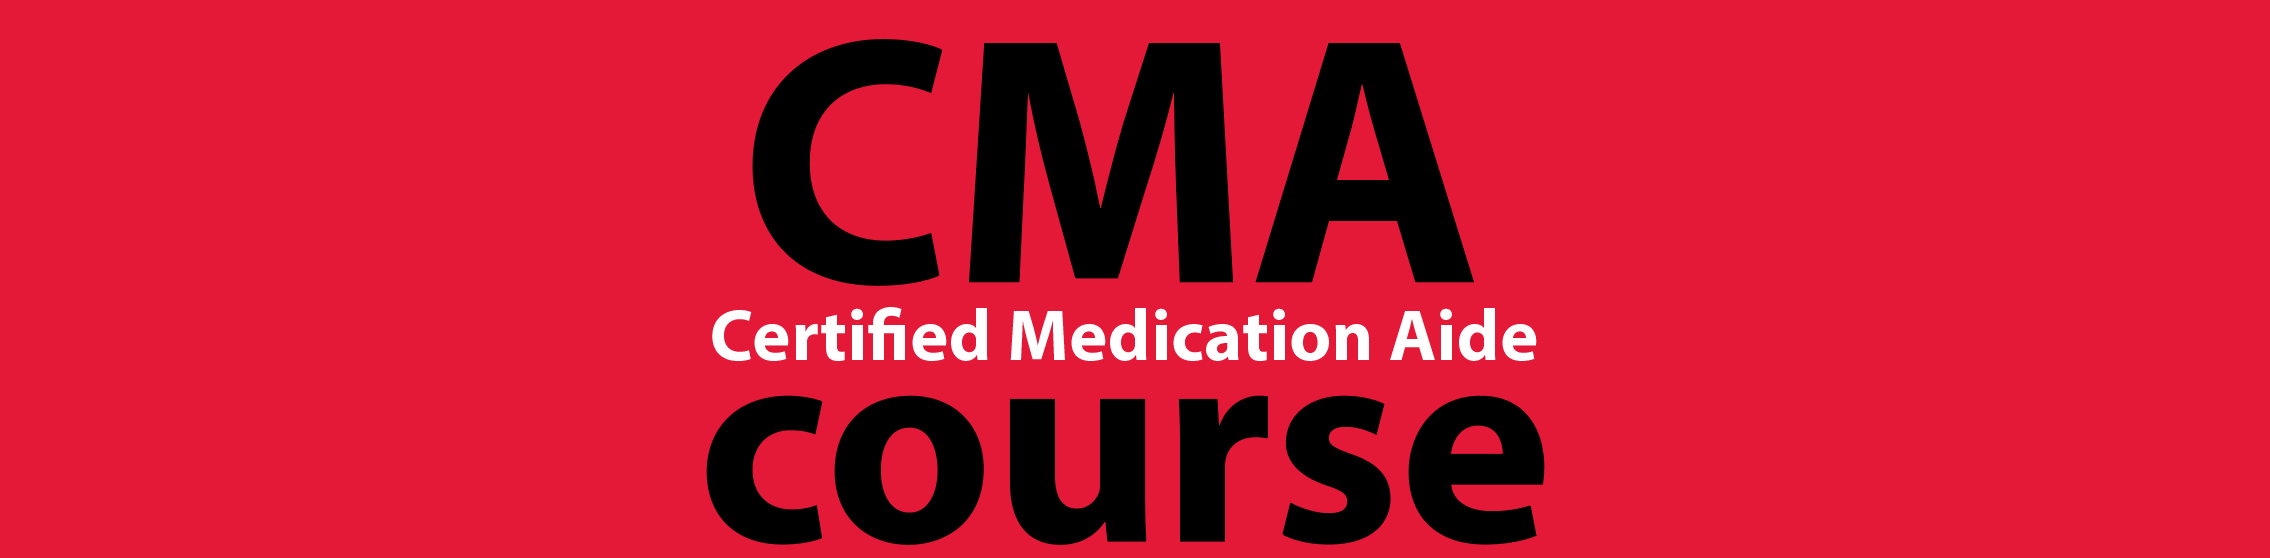 certified medication aide course